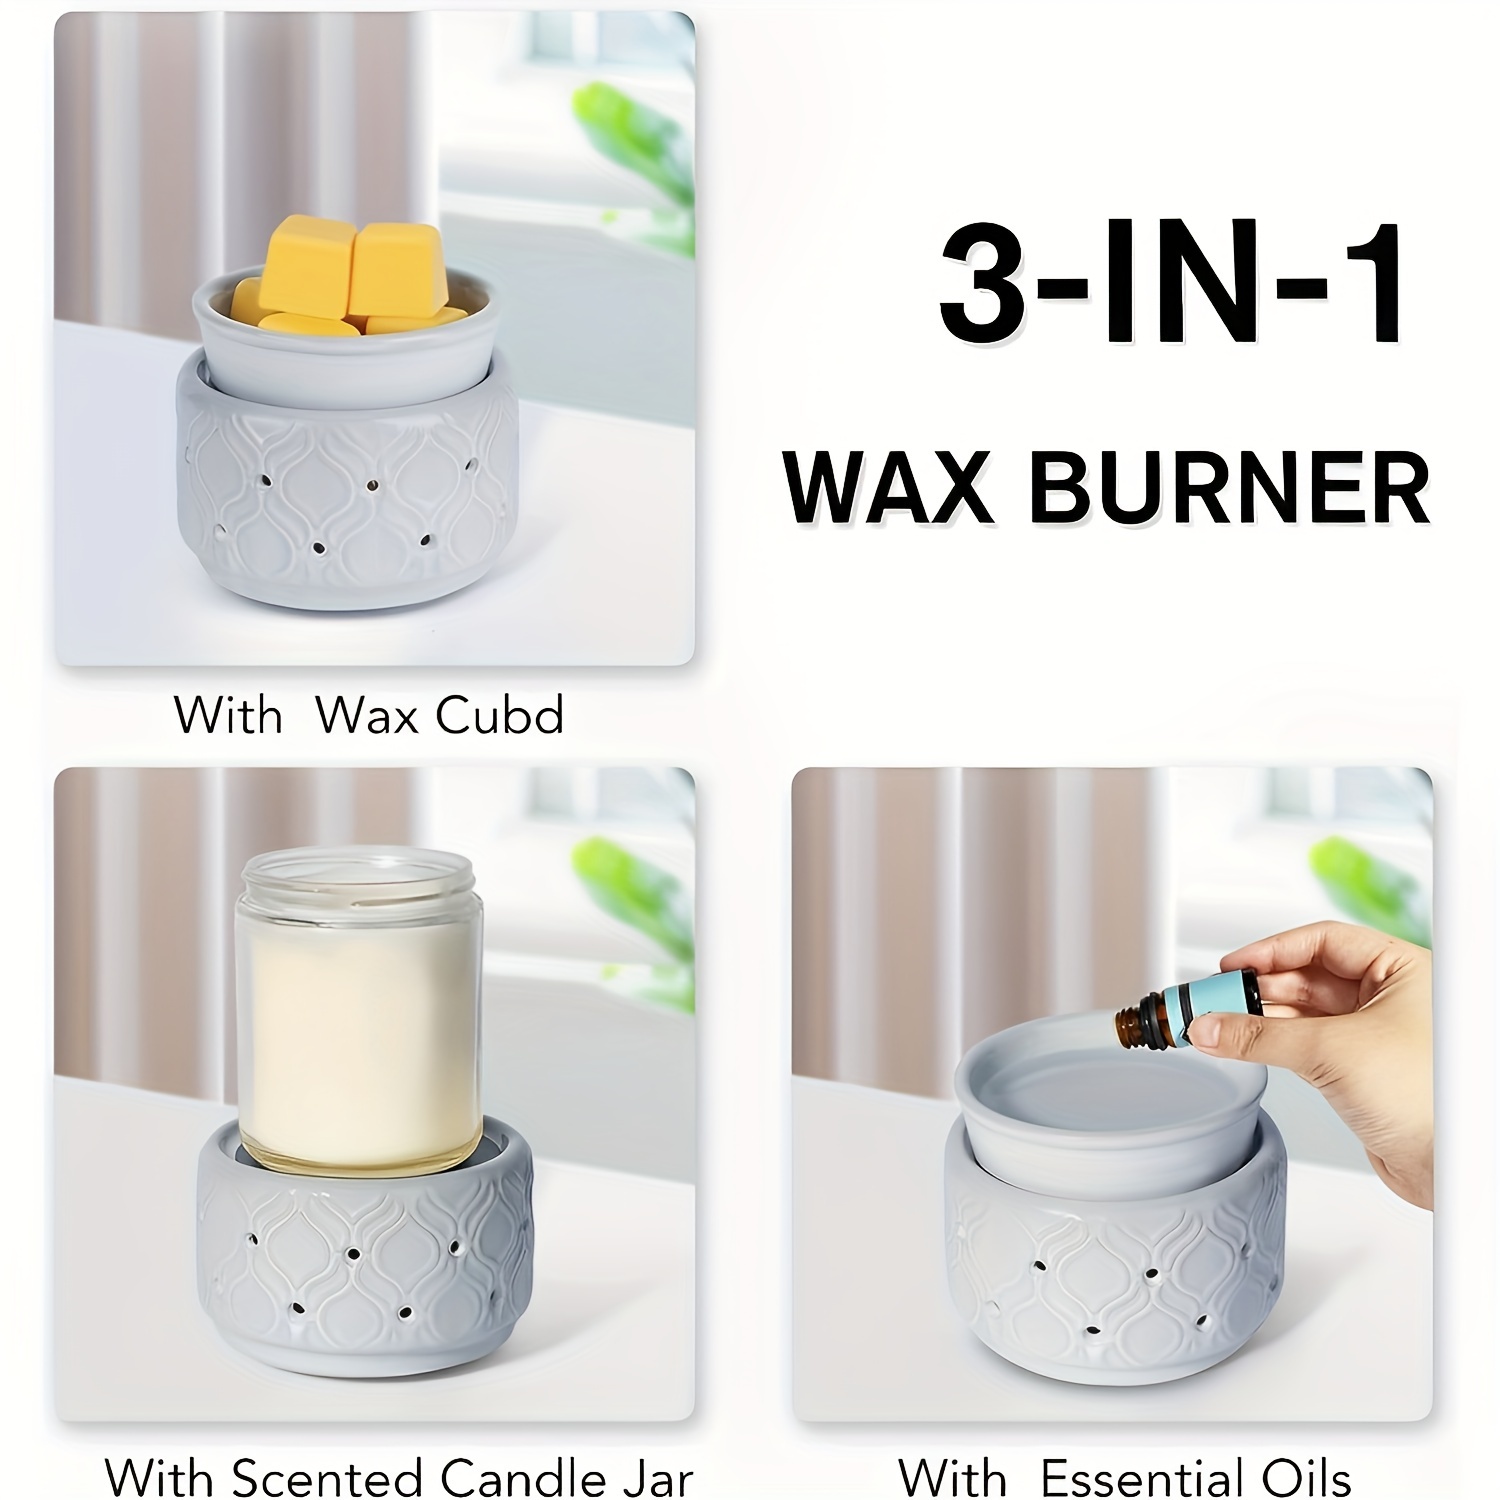  Ceramic Wax Melt Warmer Fragrance, 3-in-1 Electric Candle Wax  Burner for Wax Cubes Tarts Oil, Home Office Bedroom Living Room Decor(Gray)  : Home & Kitchen